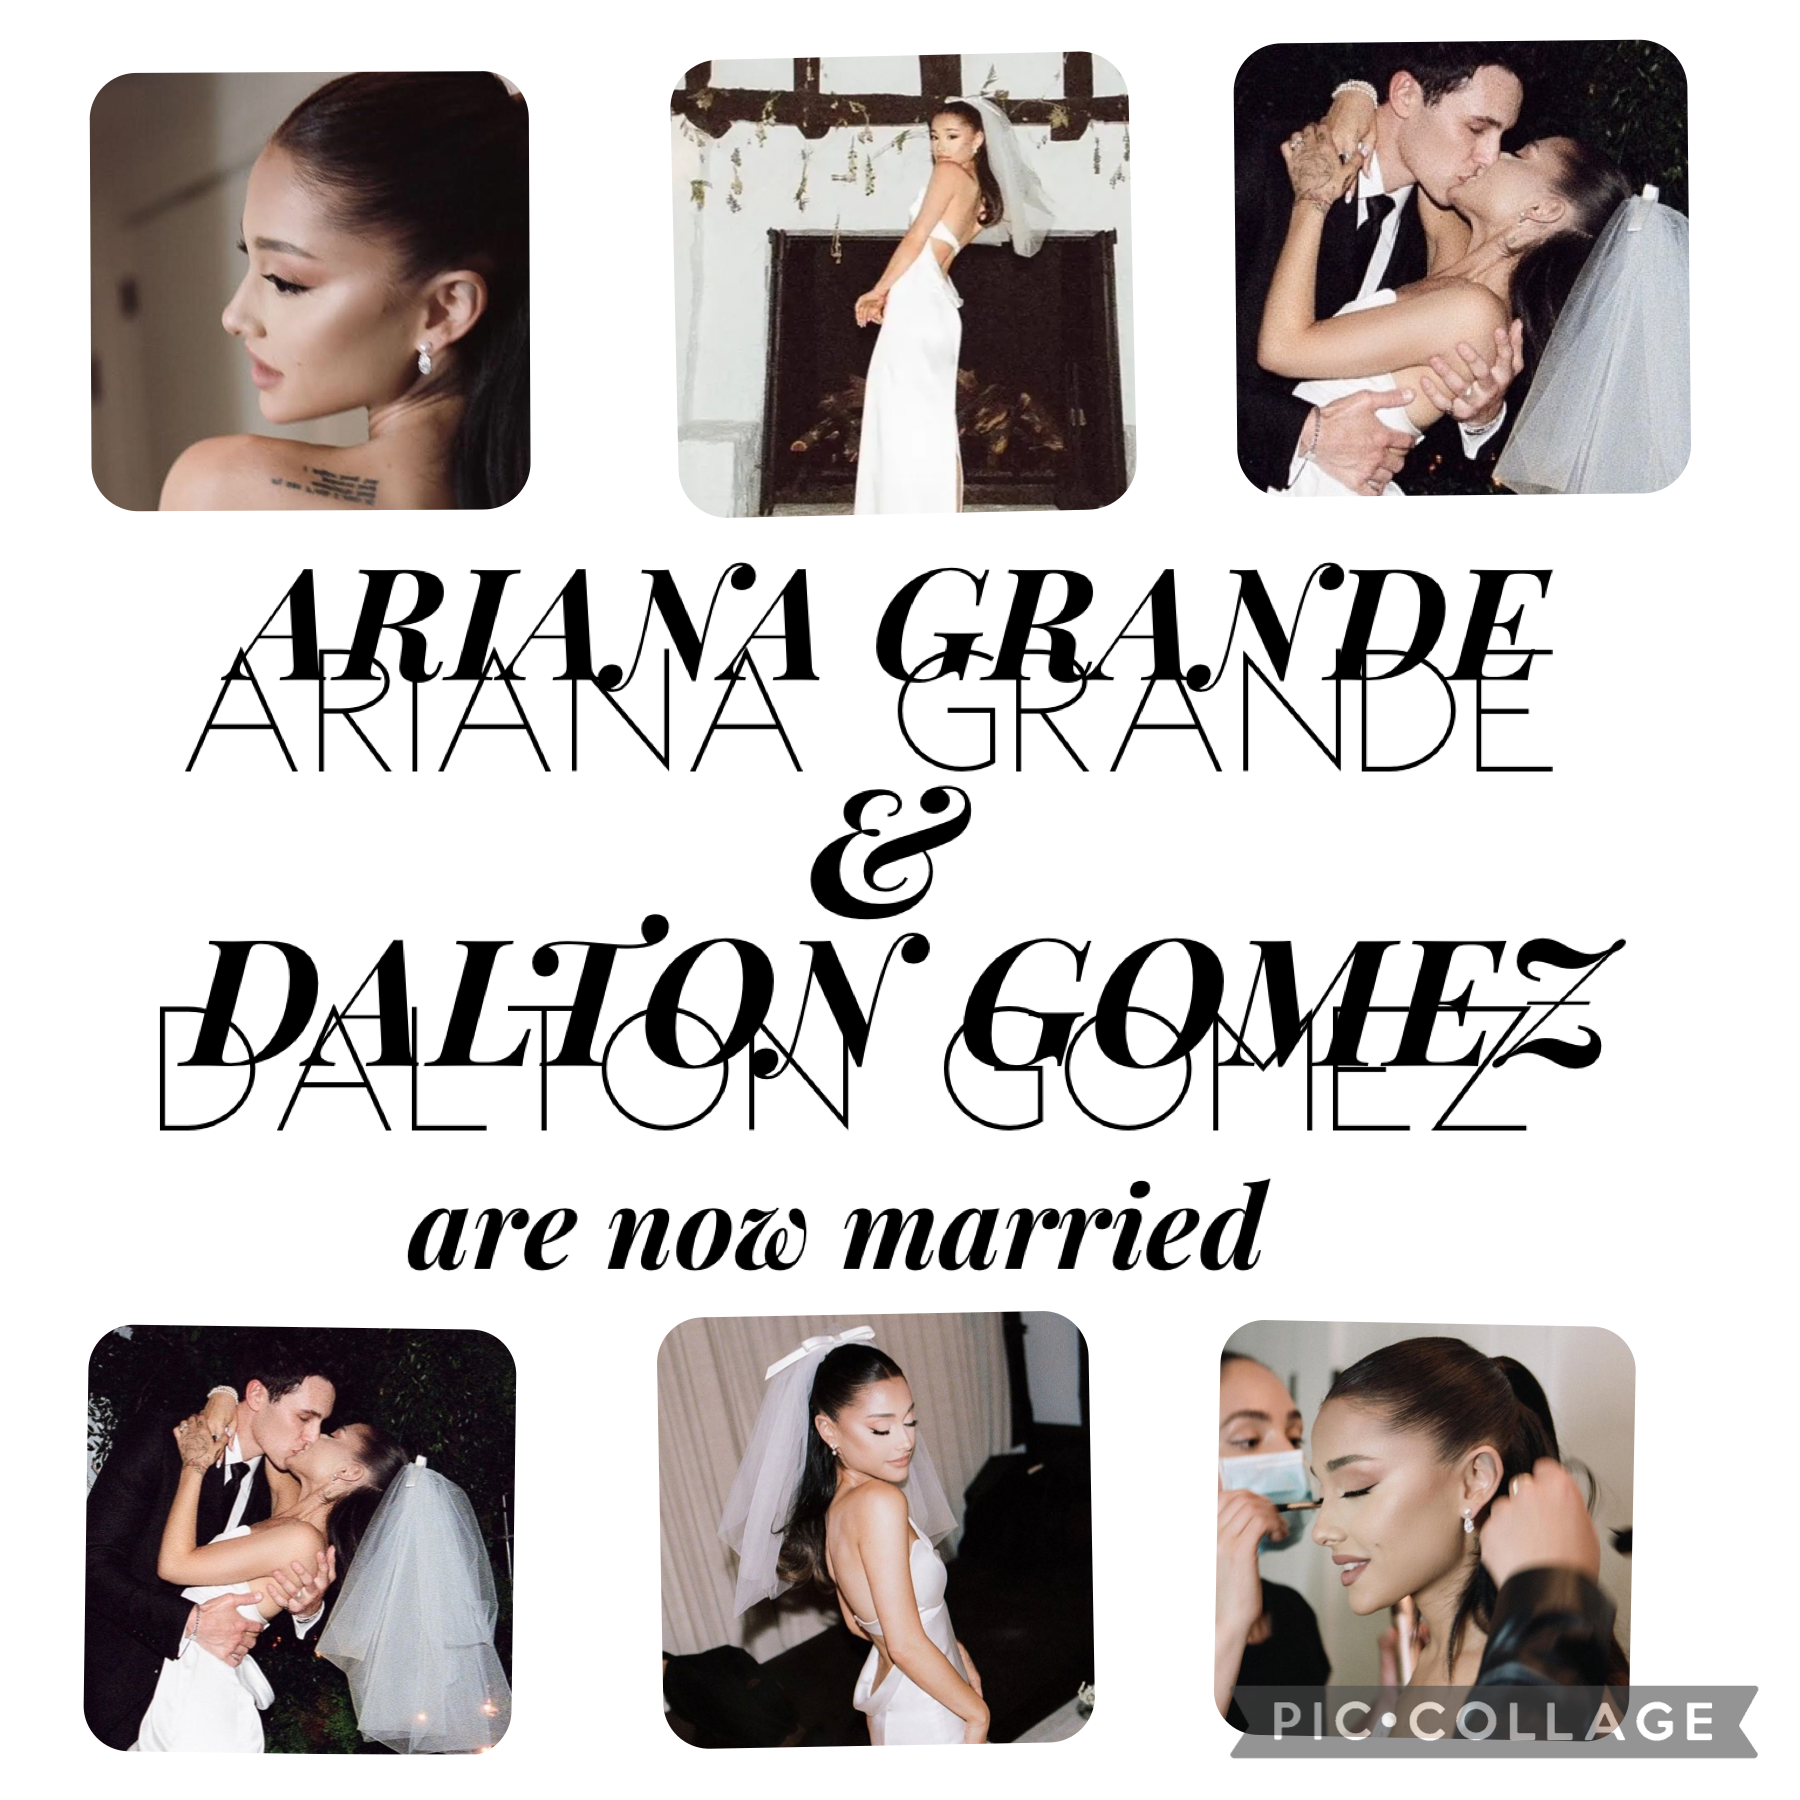 Ariana grande and Dalton Gomez got married on the  15 of May.  They have been dating since Jan 2020. I think this is one of her best relationships! 